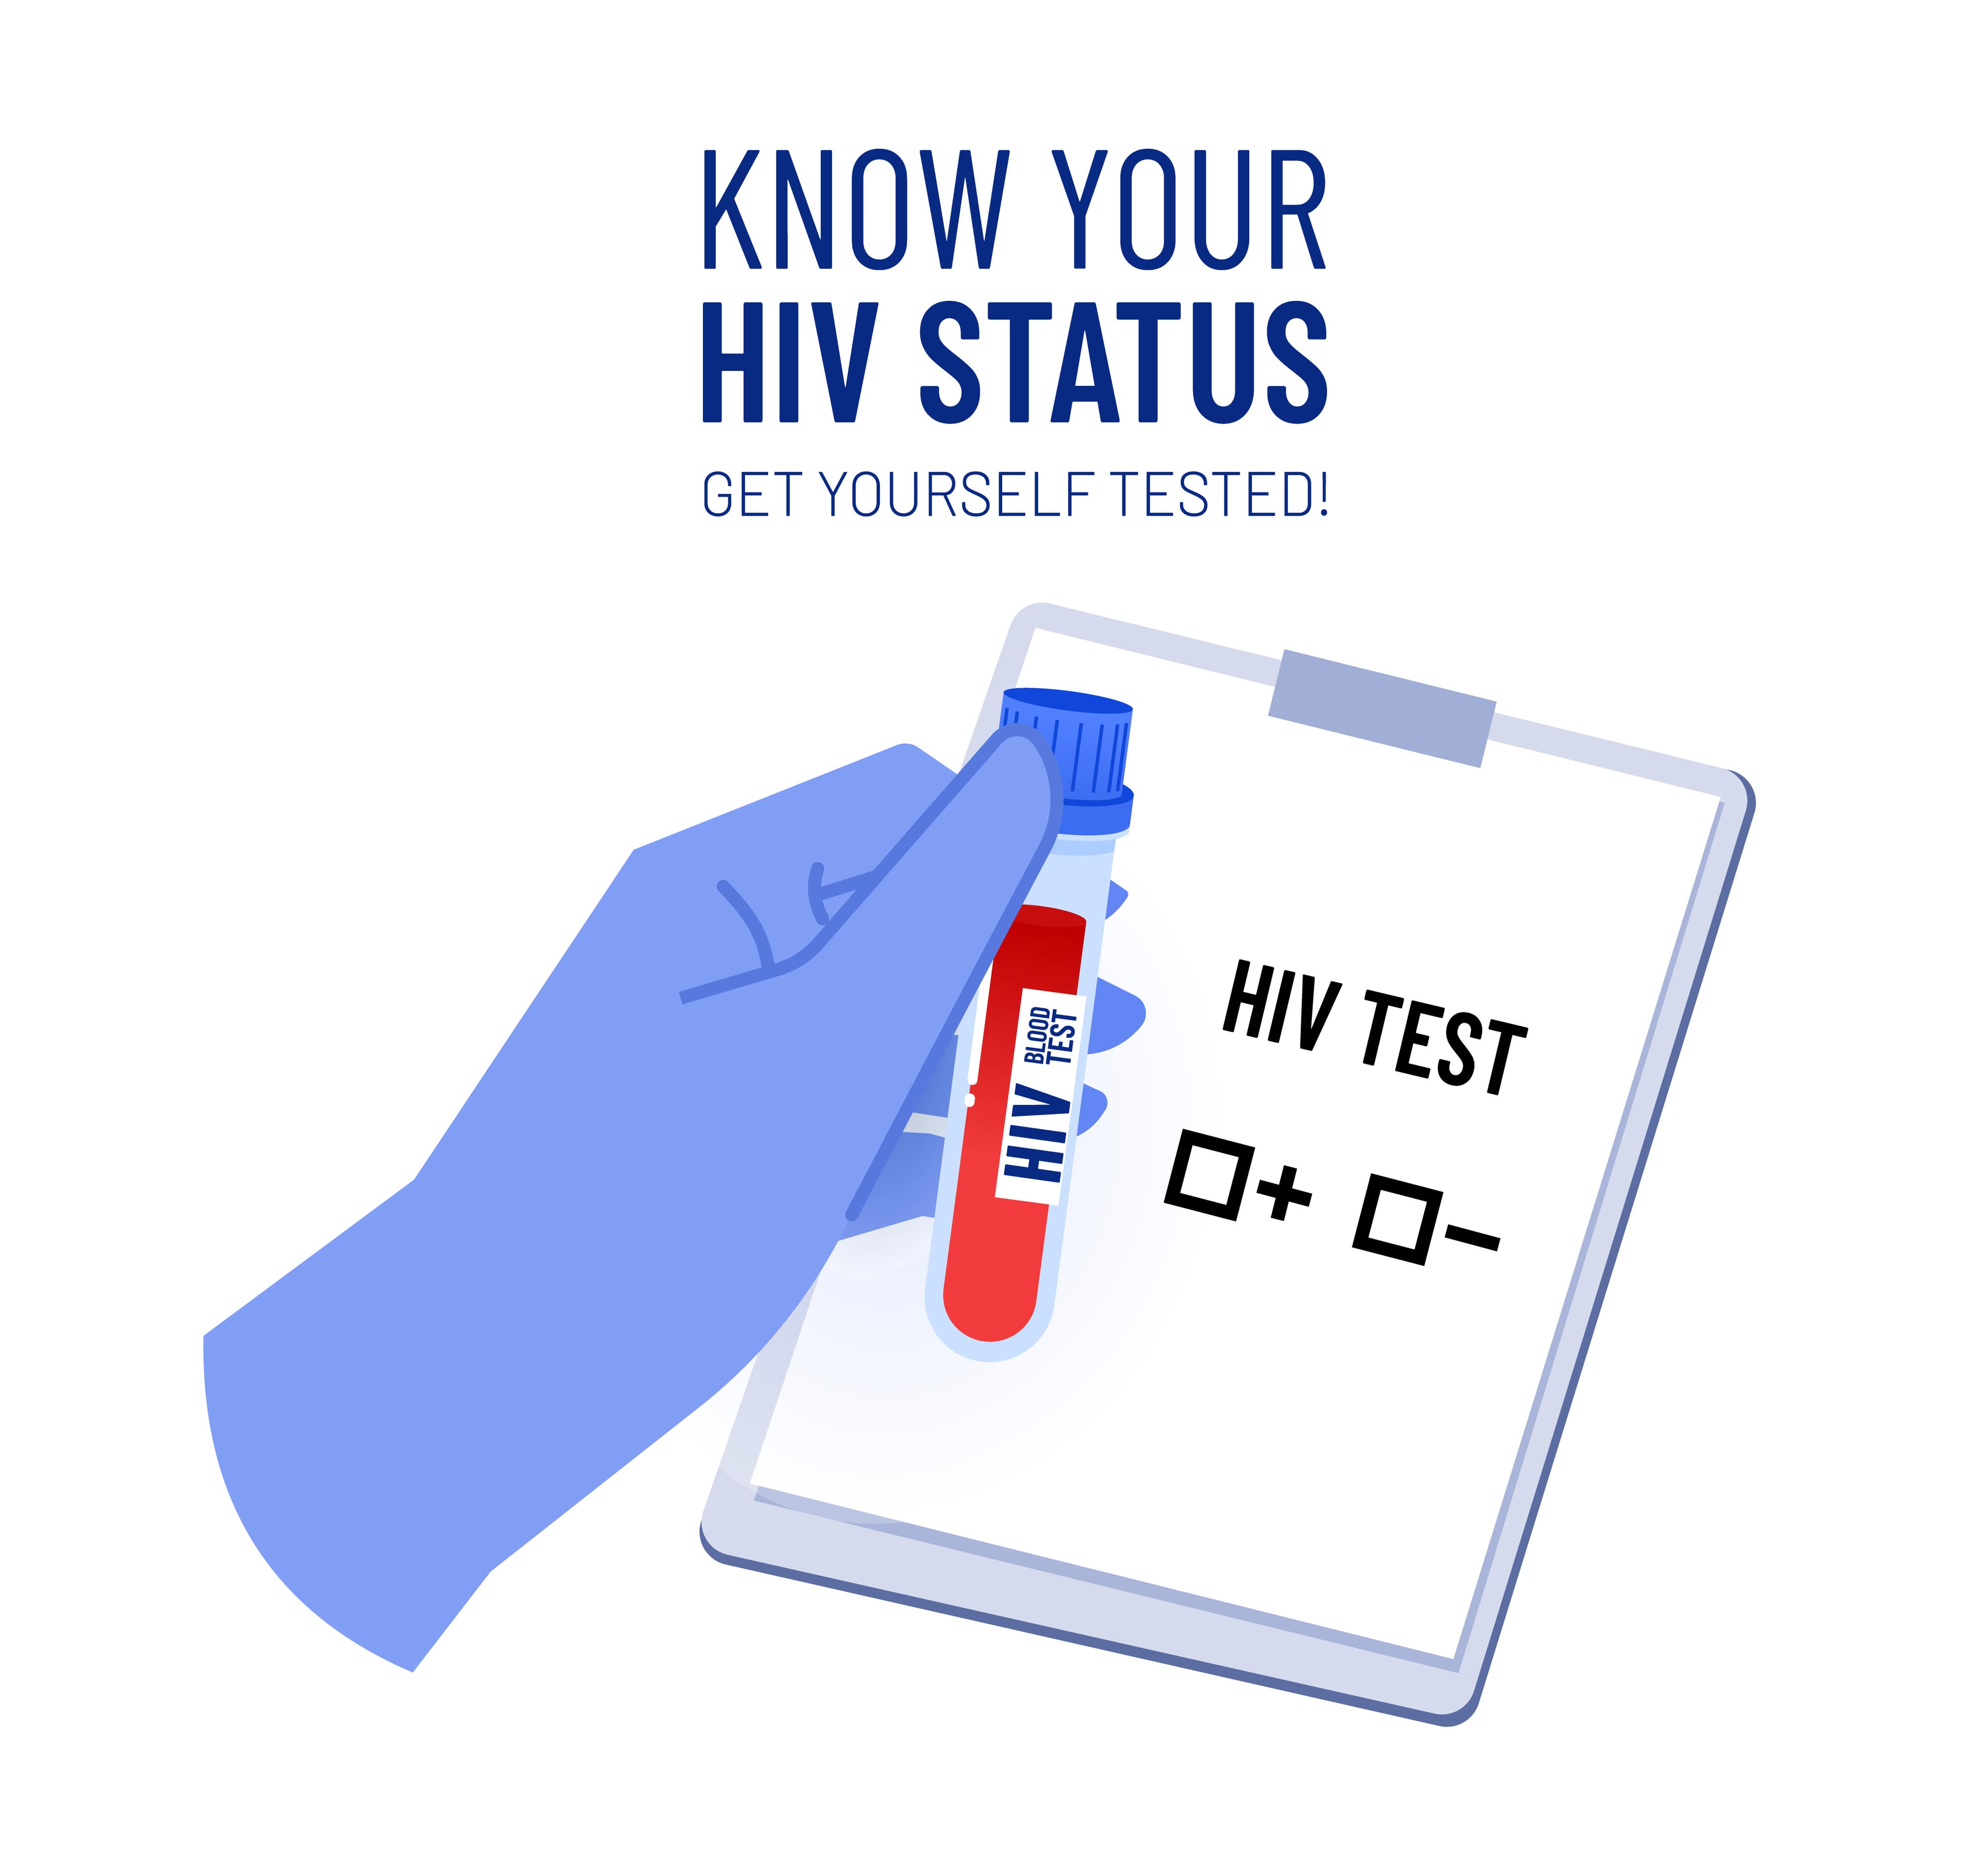 Get your test done HIV